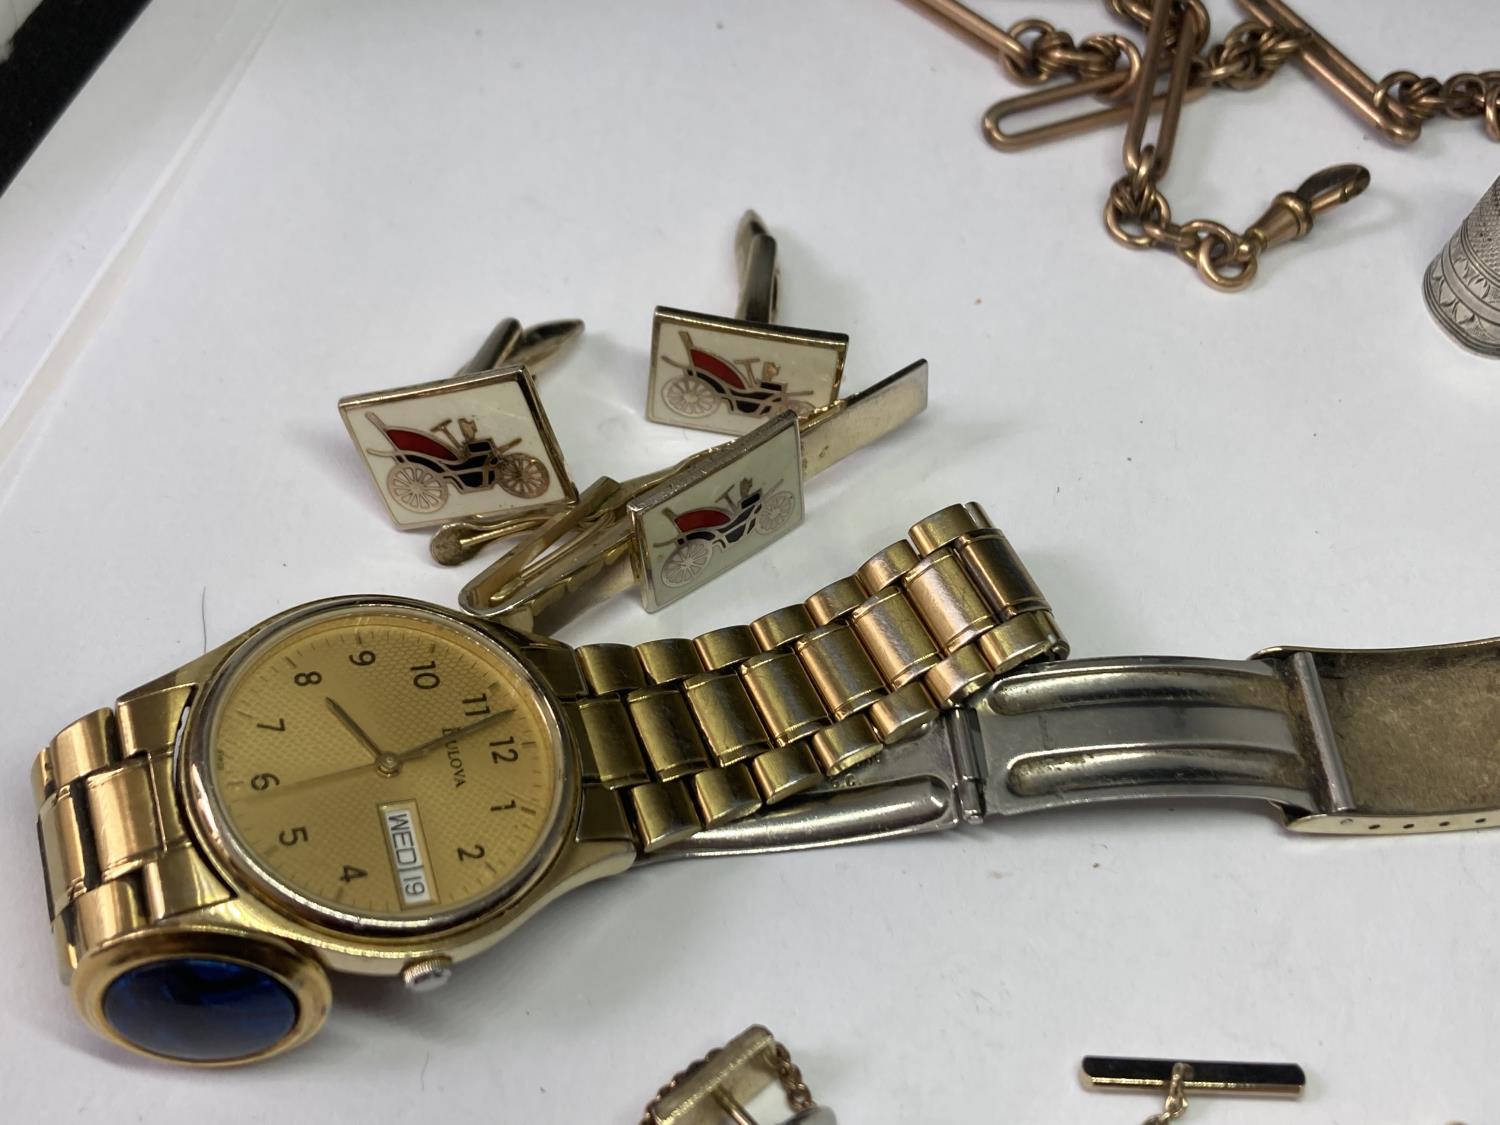 VARIOUS ITEMS TO INCLUDE AN 18 CARAT GOLD PLATED CHAIN, CUFFLINKS, TIE PINS, BOXED FESTIVAL OF - Image 3 of 4